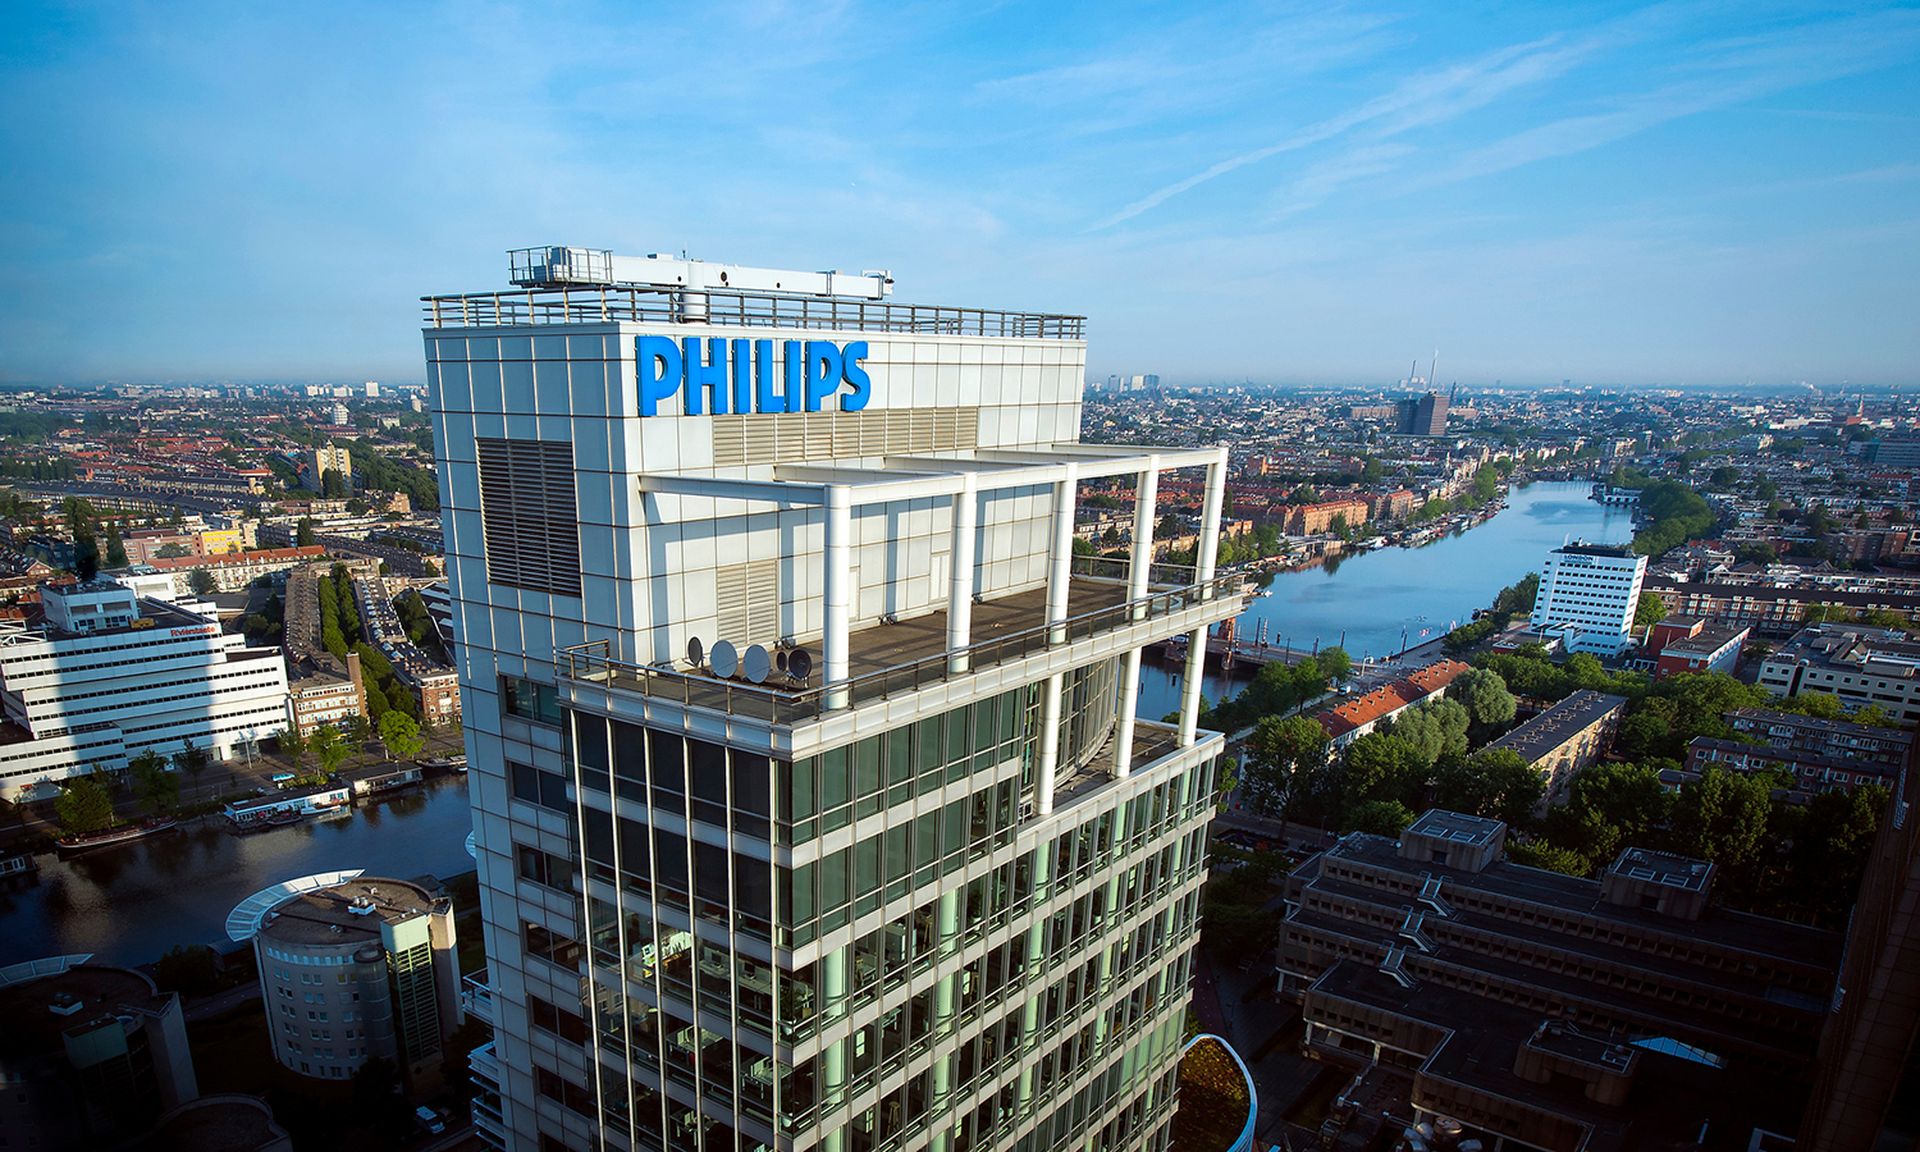 The Philips global headquarters in Amsterdam. (Philips)